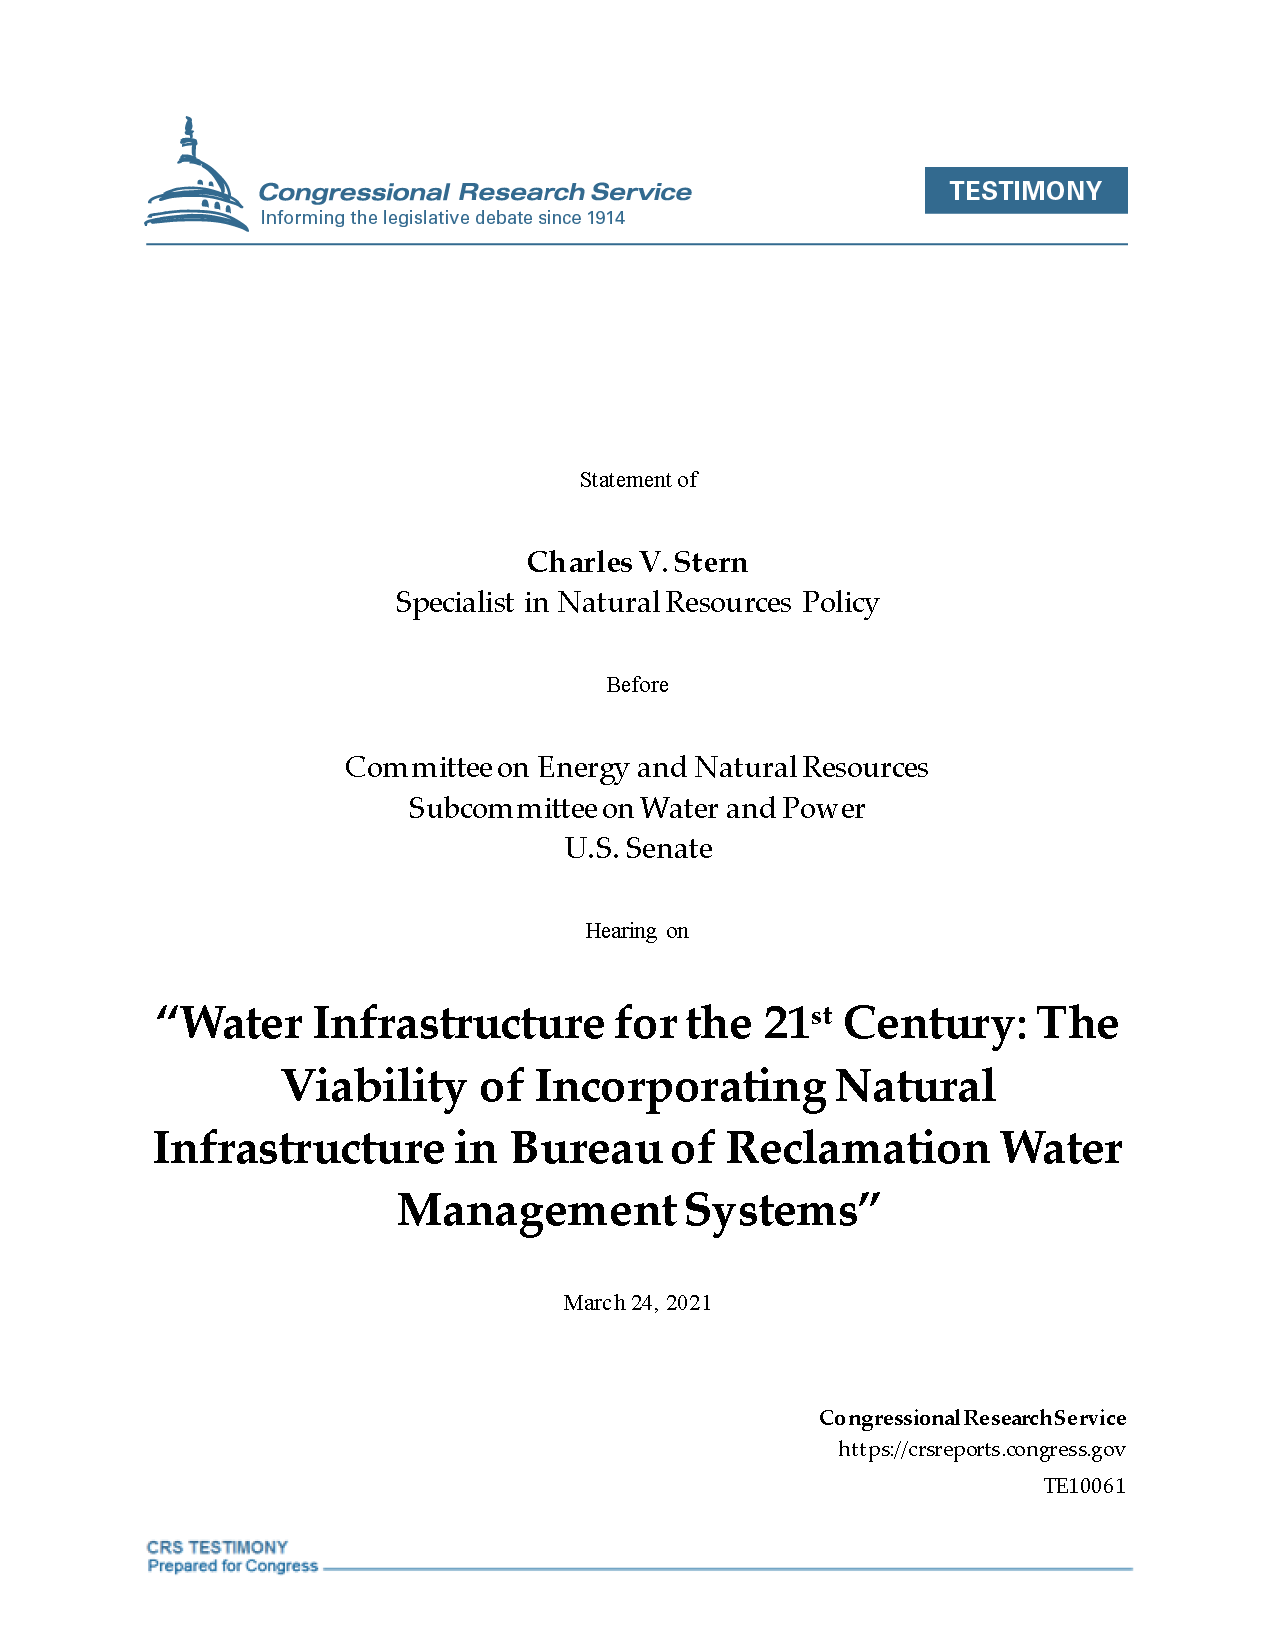 Cover page for water infrastructure for the 21st century